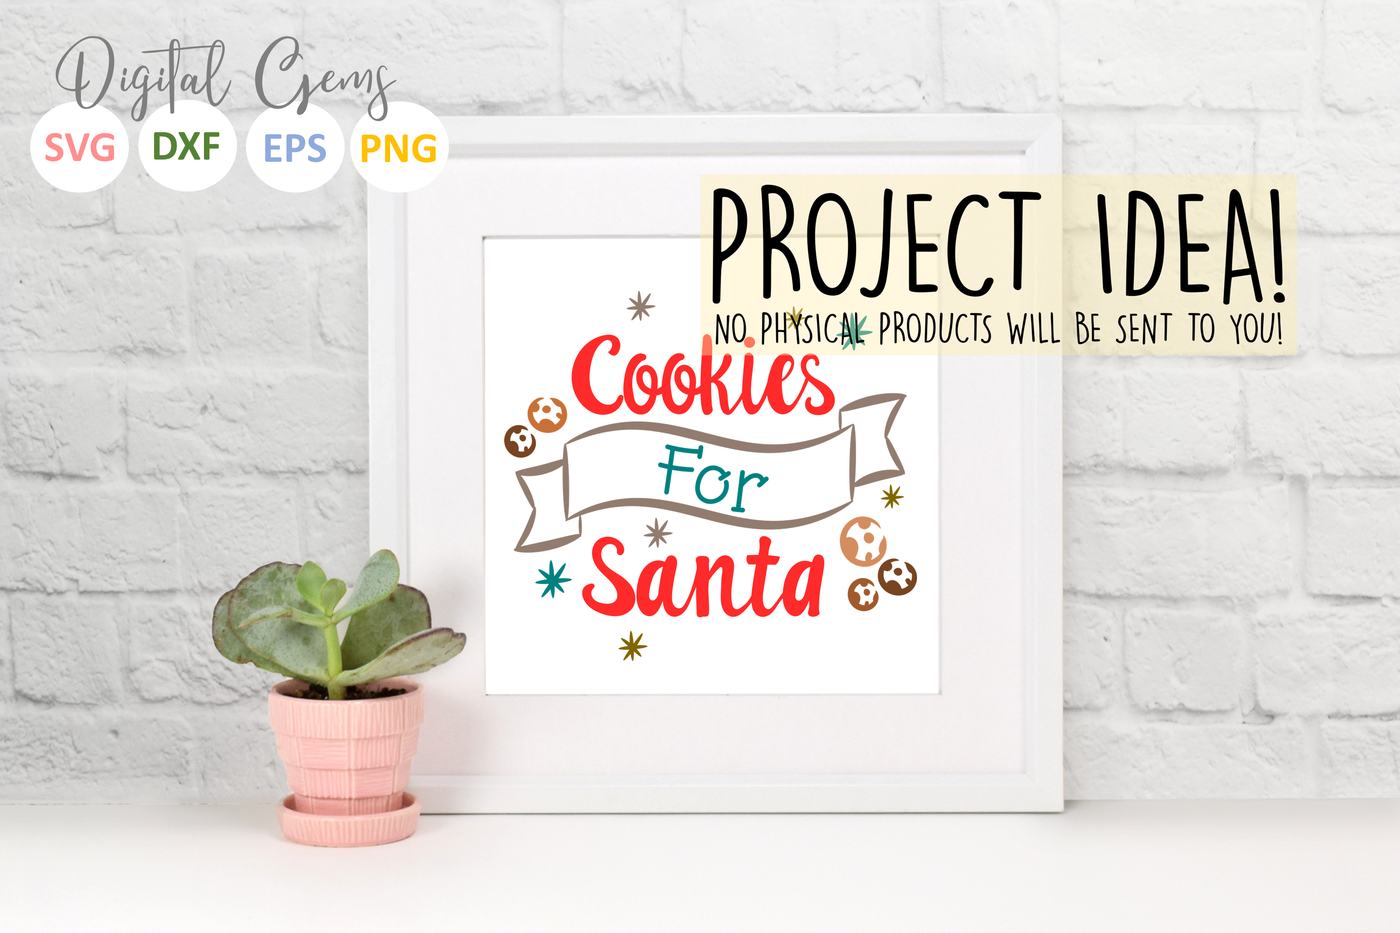 Milk And Cookies For Santa Carrots For The Reindeer Christmas Design By Digital Gems Thehungryjpeg Com